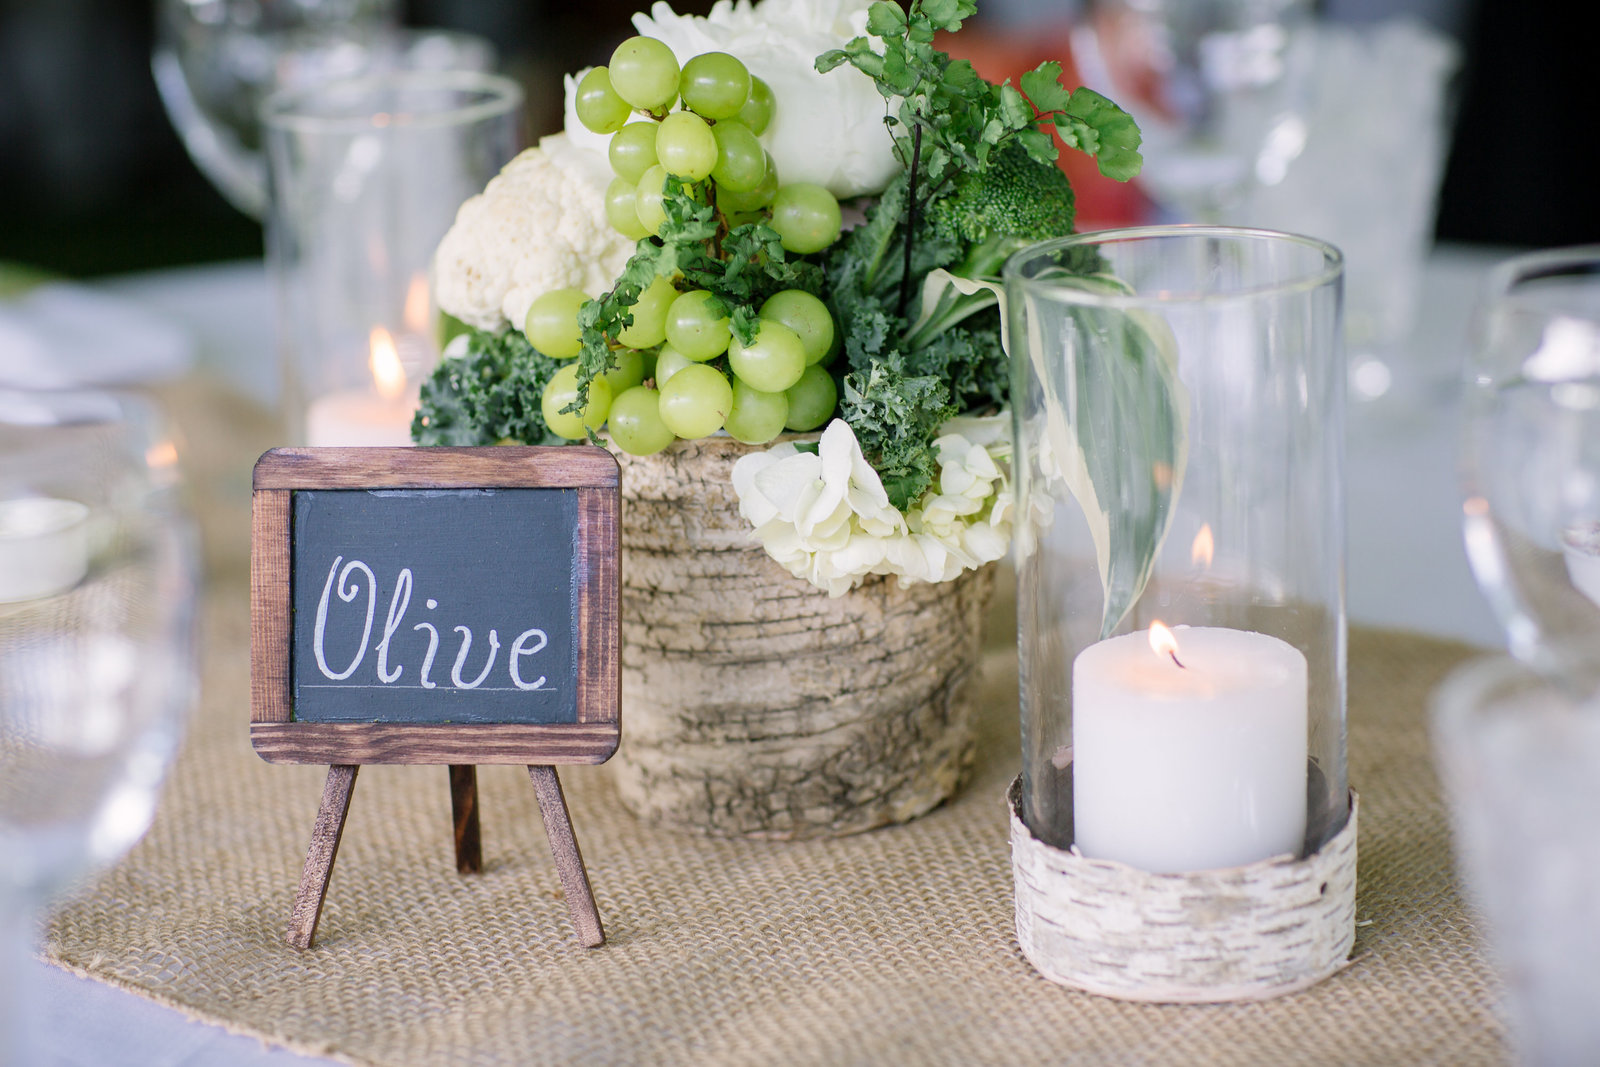 Unique centerpiece with herbs and veggies and mini chalkboard